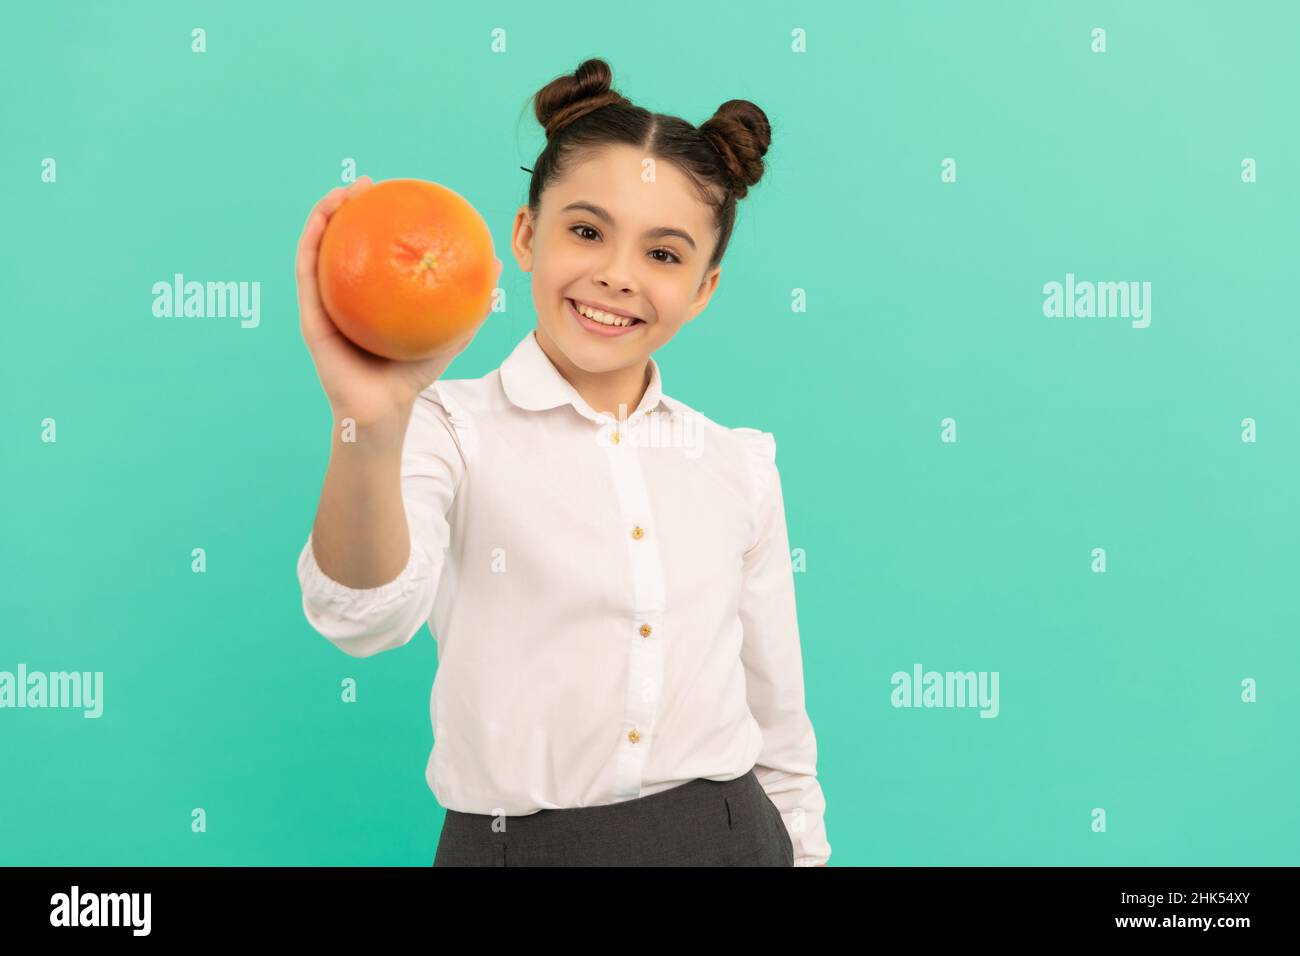 smiling school kid with grapefruit on blue background, dieting Stock Photo